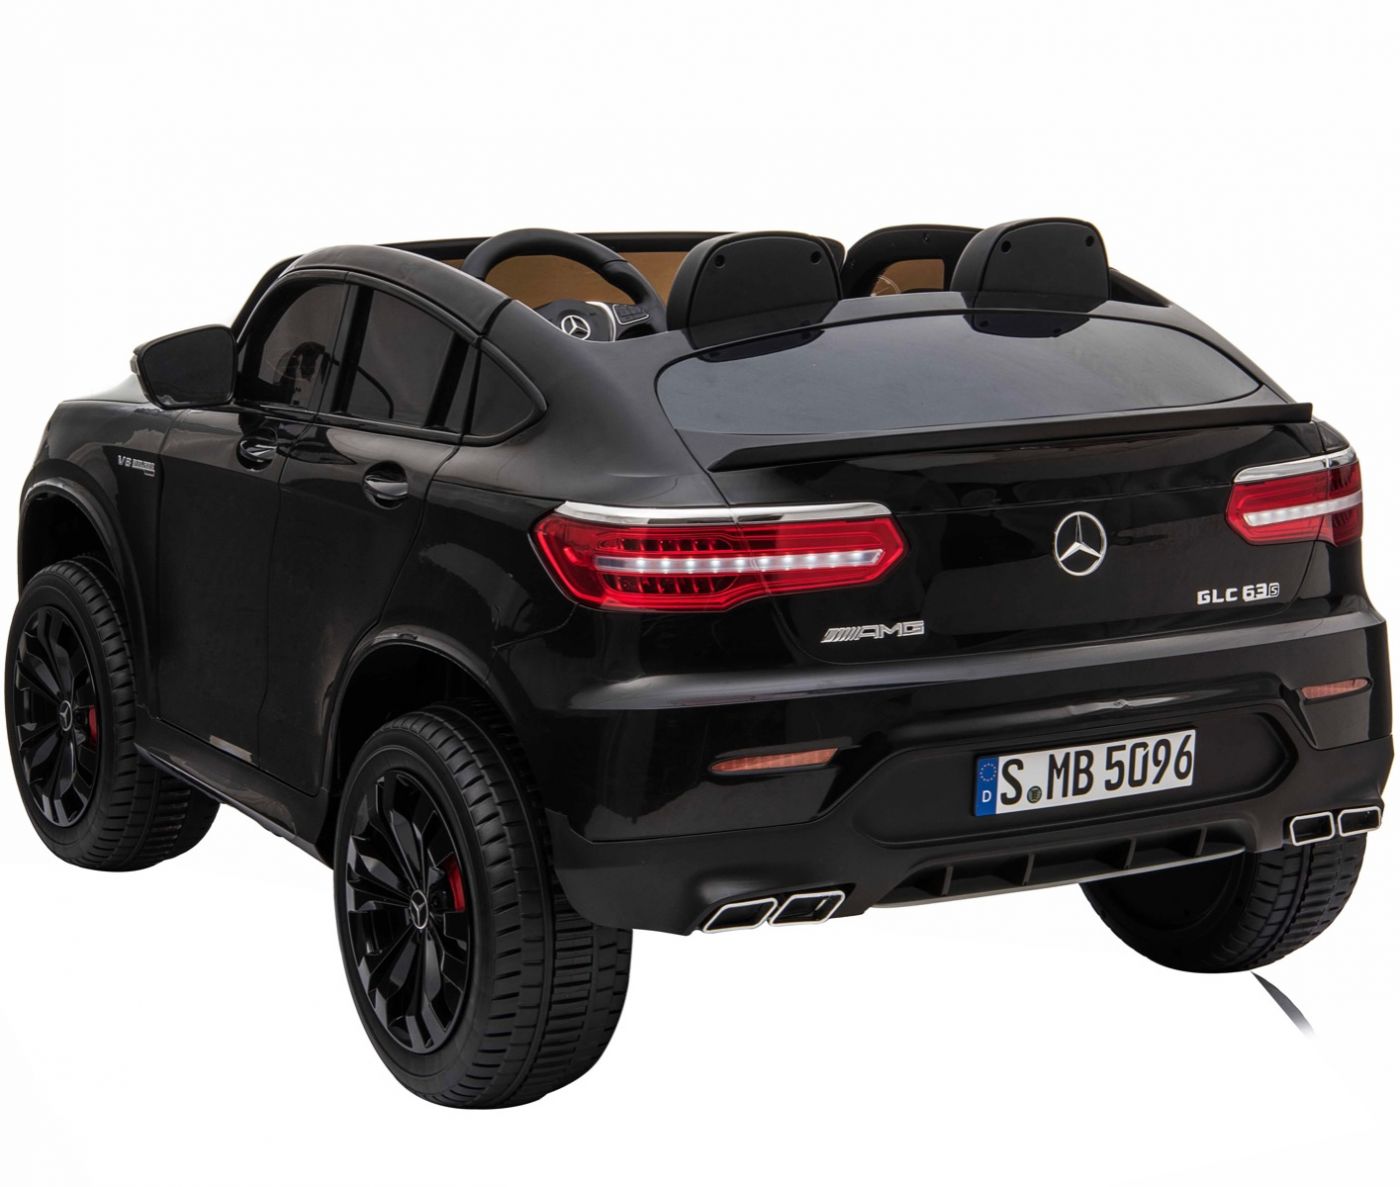 Black Mercedes AMG GLC63 S Coupe two-seater electric ride-on car for kids on a white background".